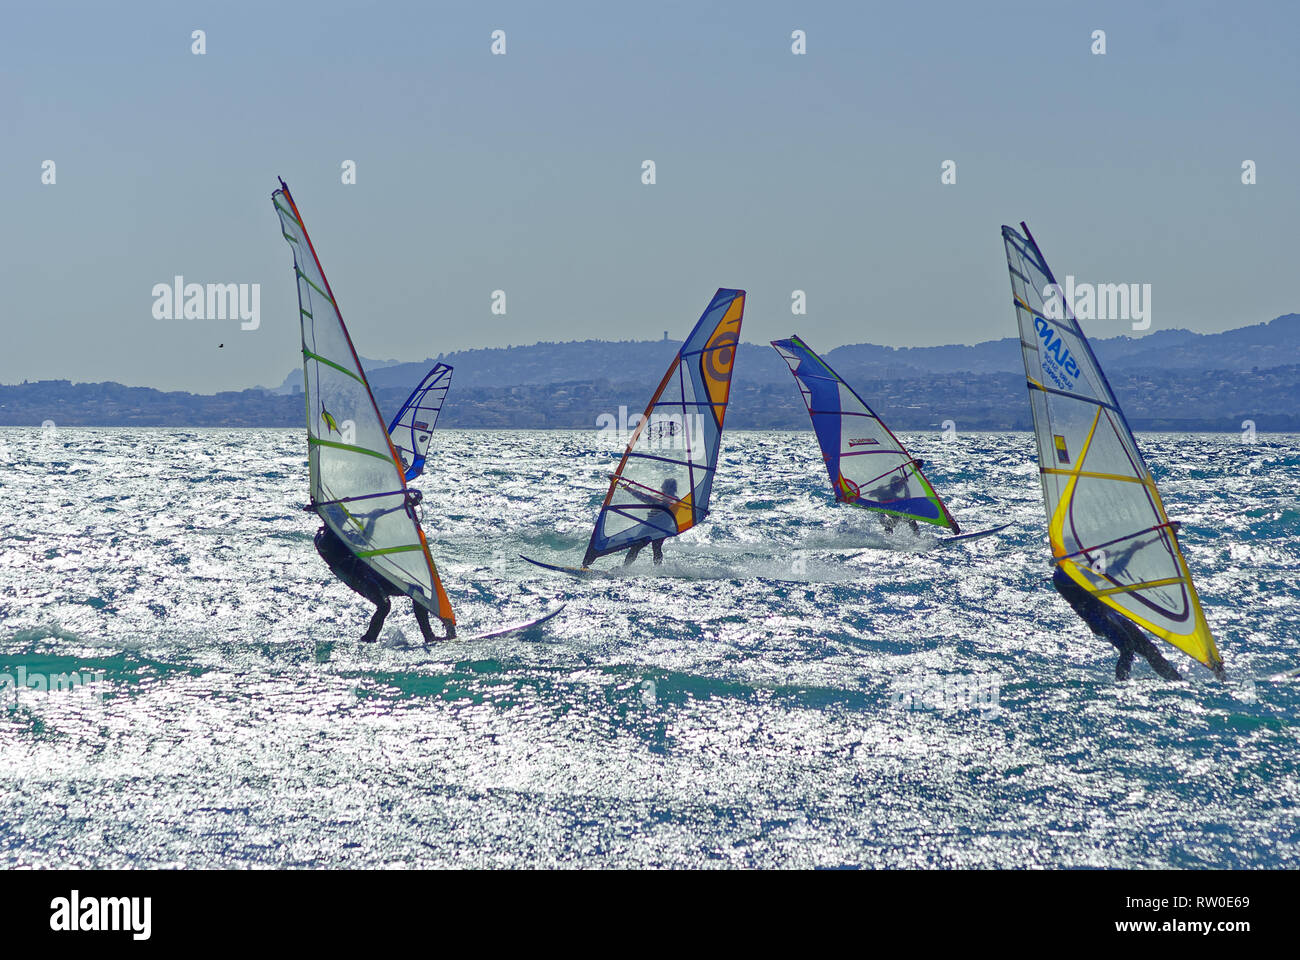 Windsurfers racing in the wind during a windy day Stock Photo